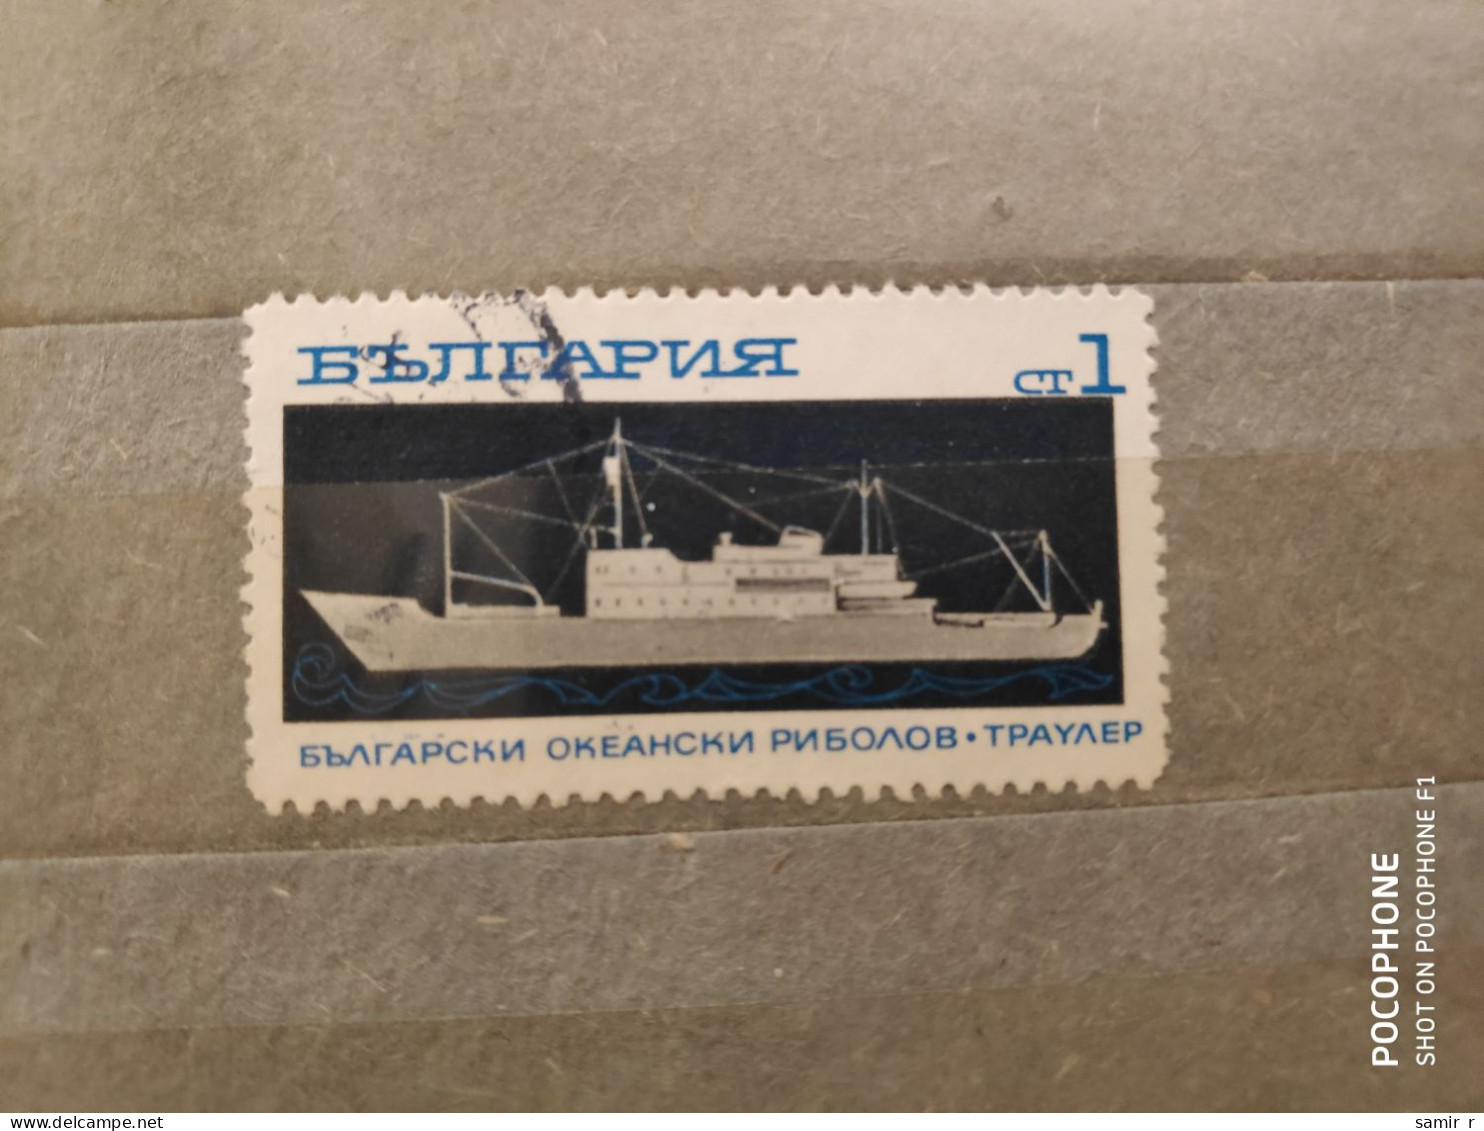 Bulgaria	Ships (F73) - Used Stamps